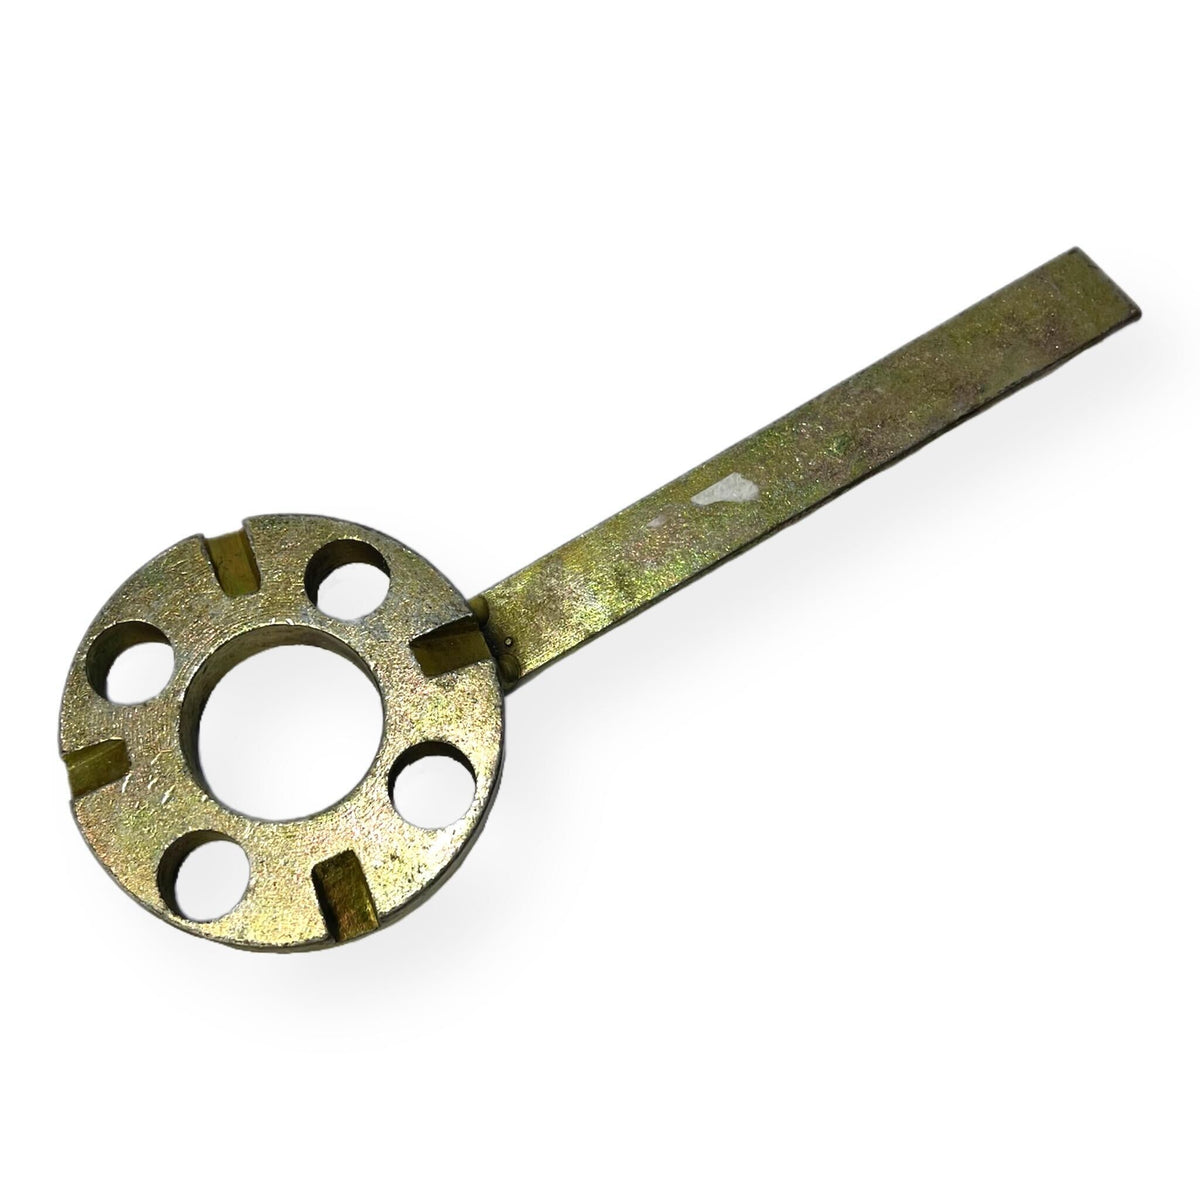 Lambretta 5 Plate Competition Clutch Holding Tool